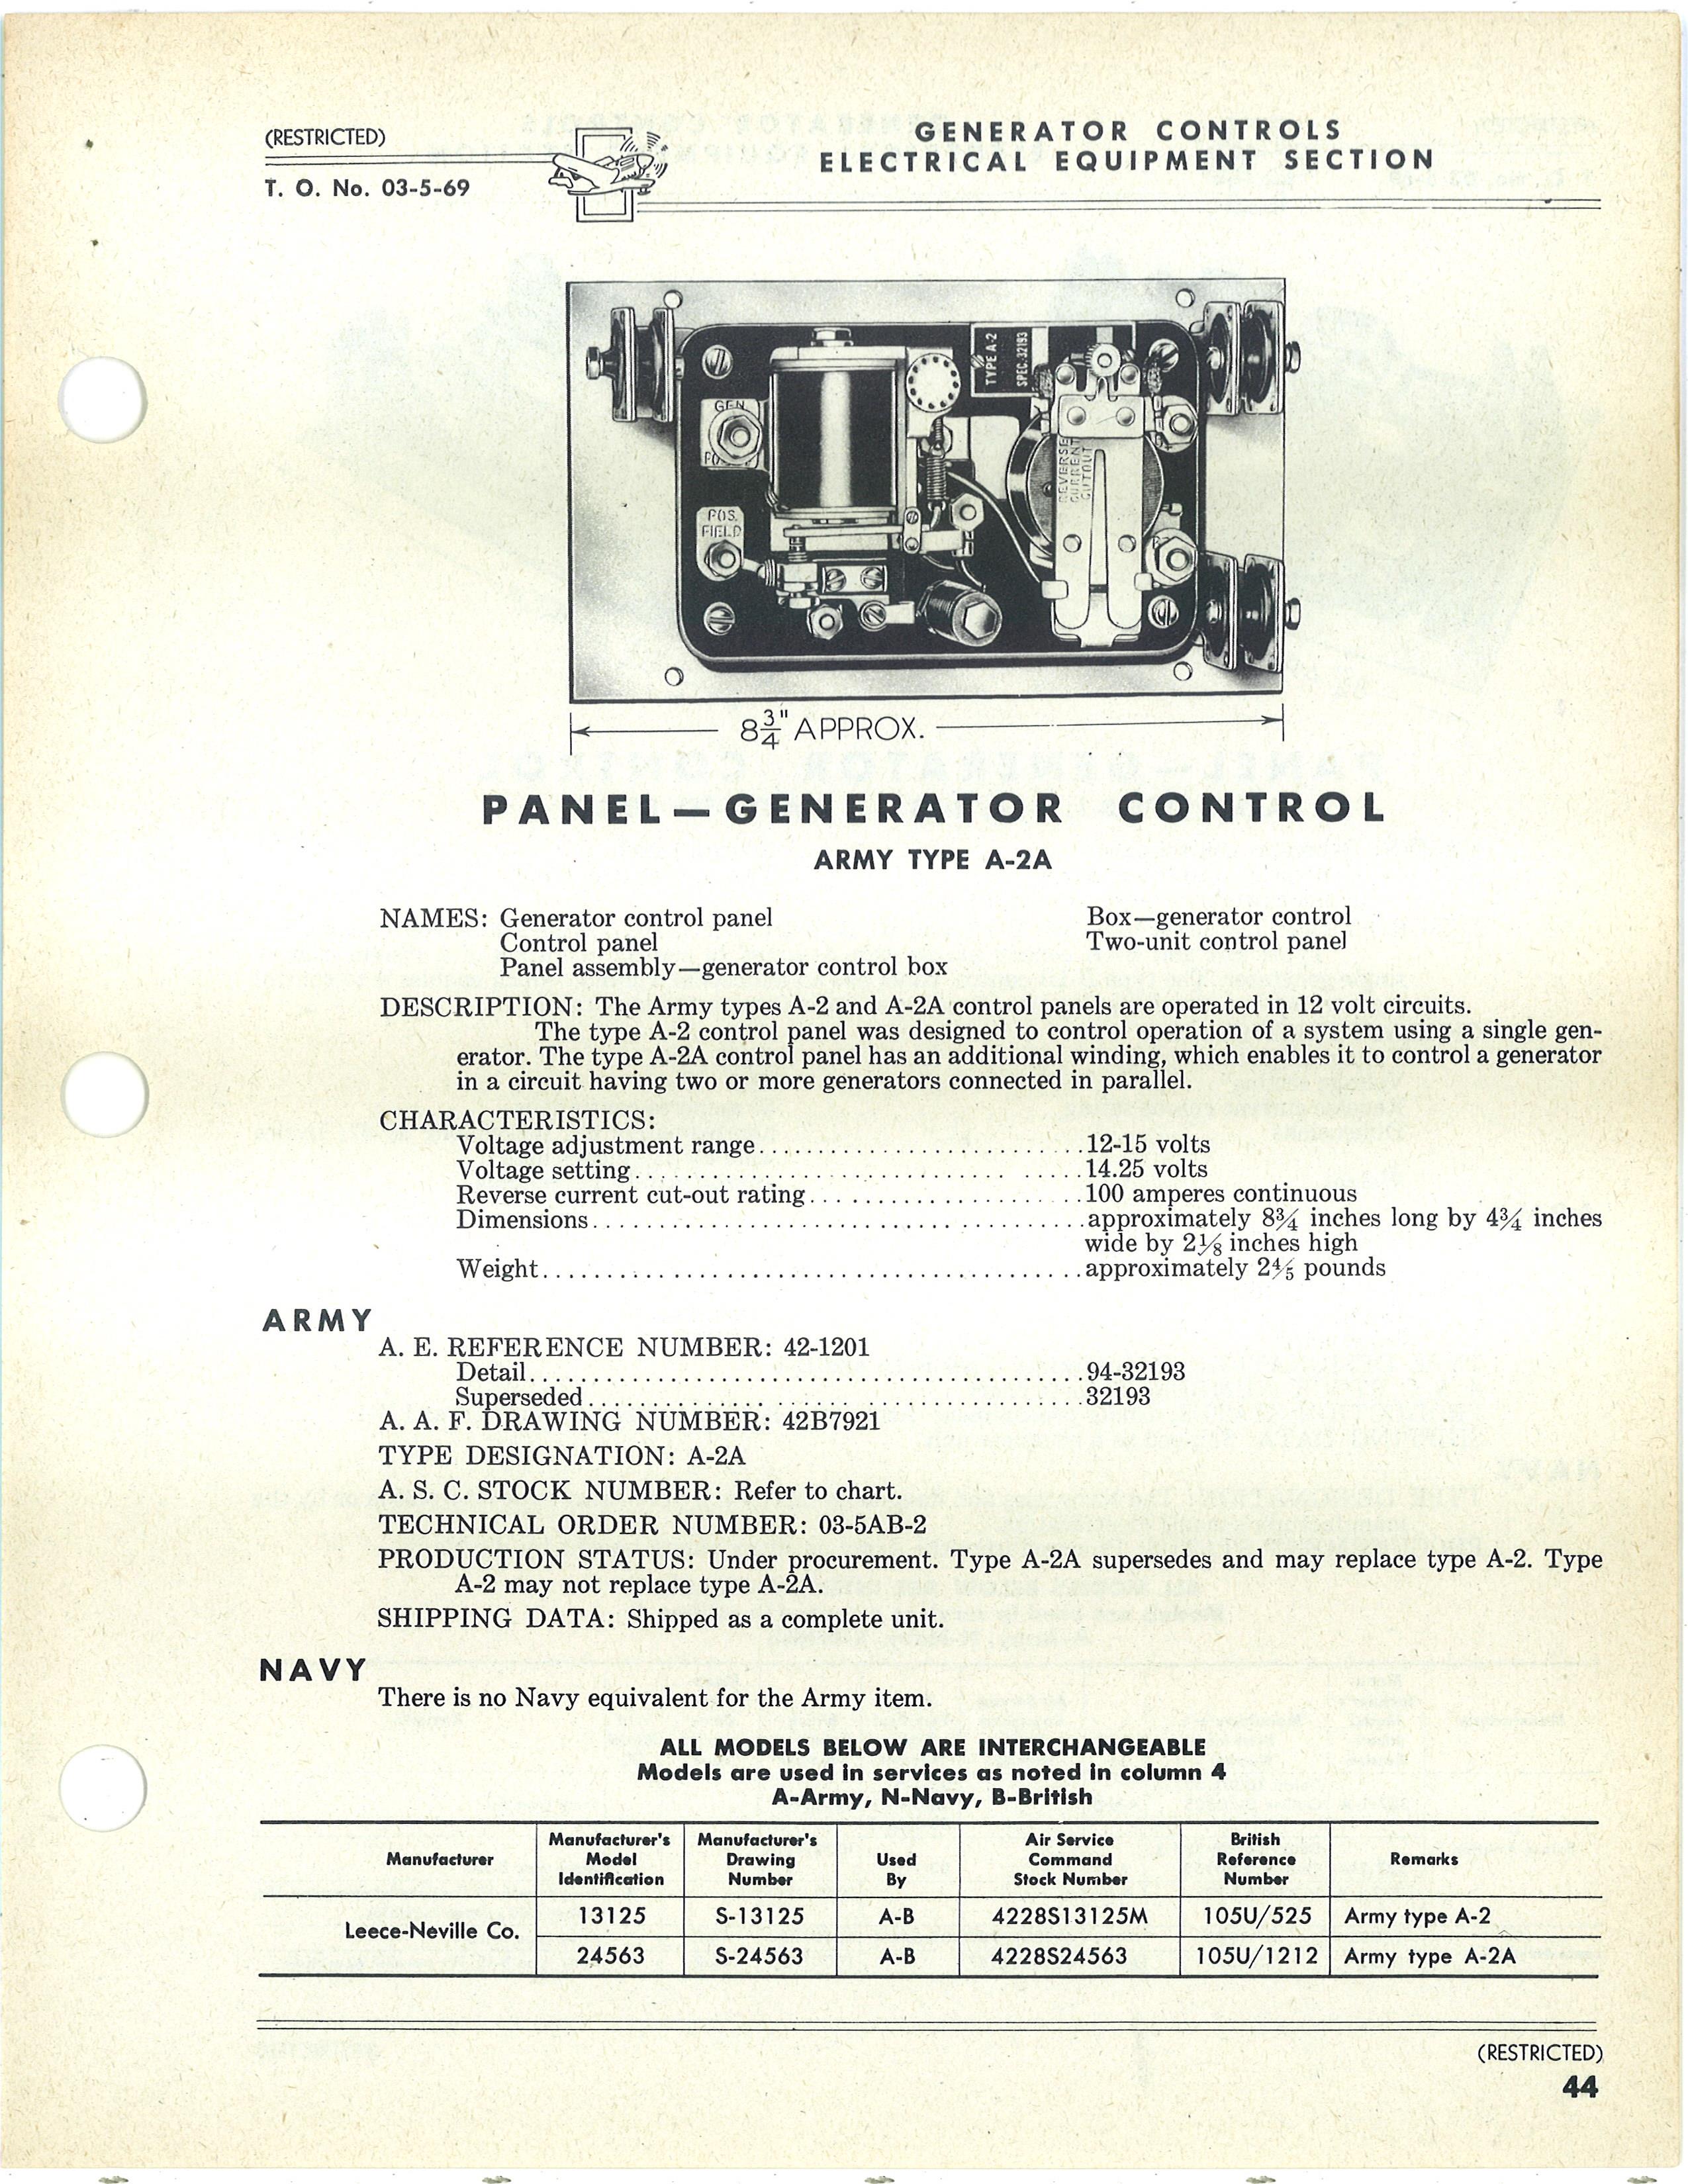 Sample page 5 from AirCorps Library document: Index of Army Navy Electrical, Aeronautical Equipment